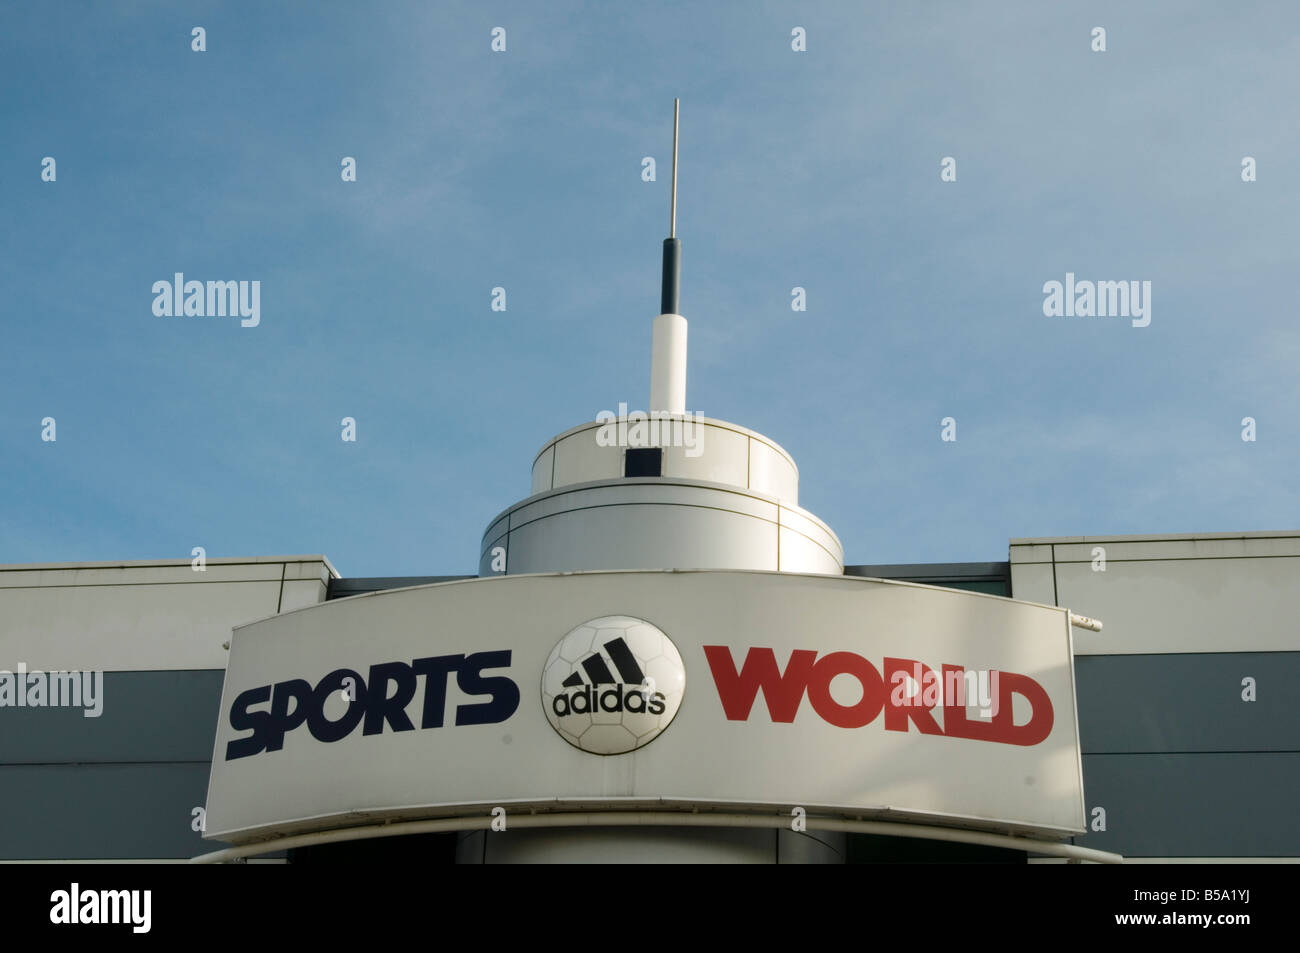 Sports Clothes Shop High Resolution Stock Photography and Images - Alamy